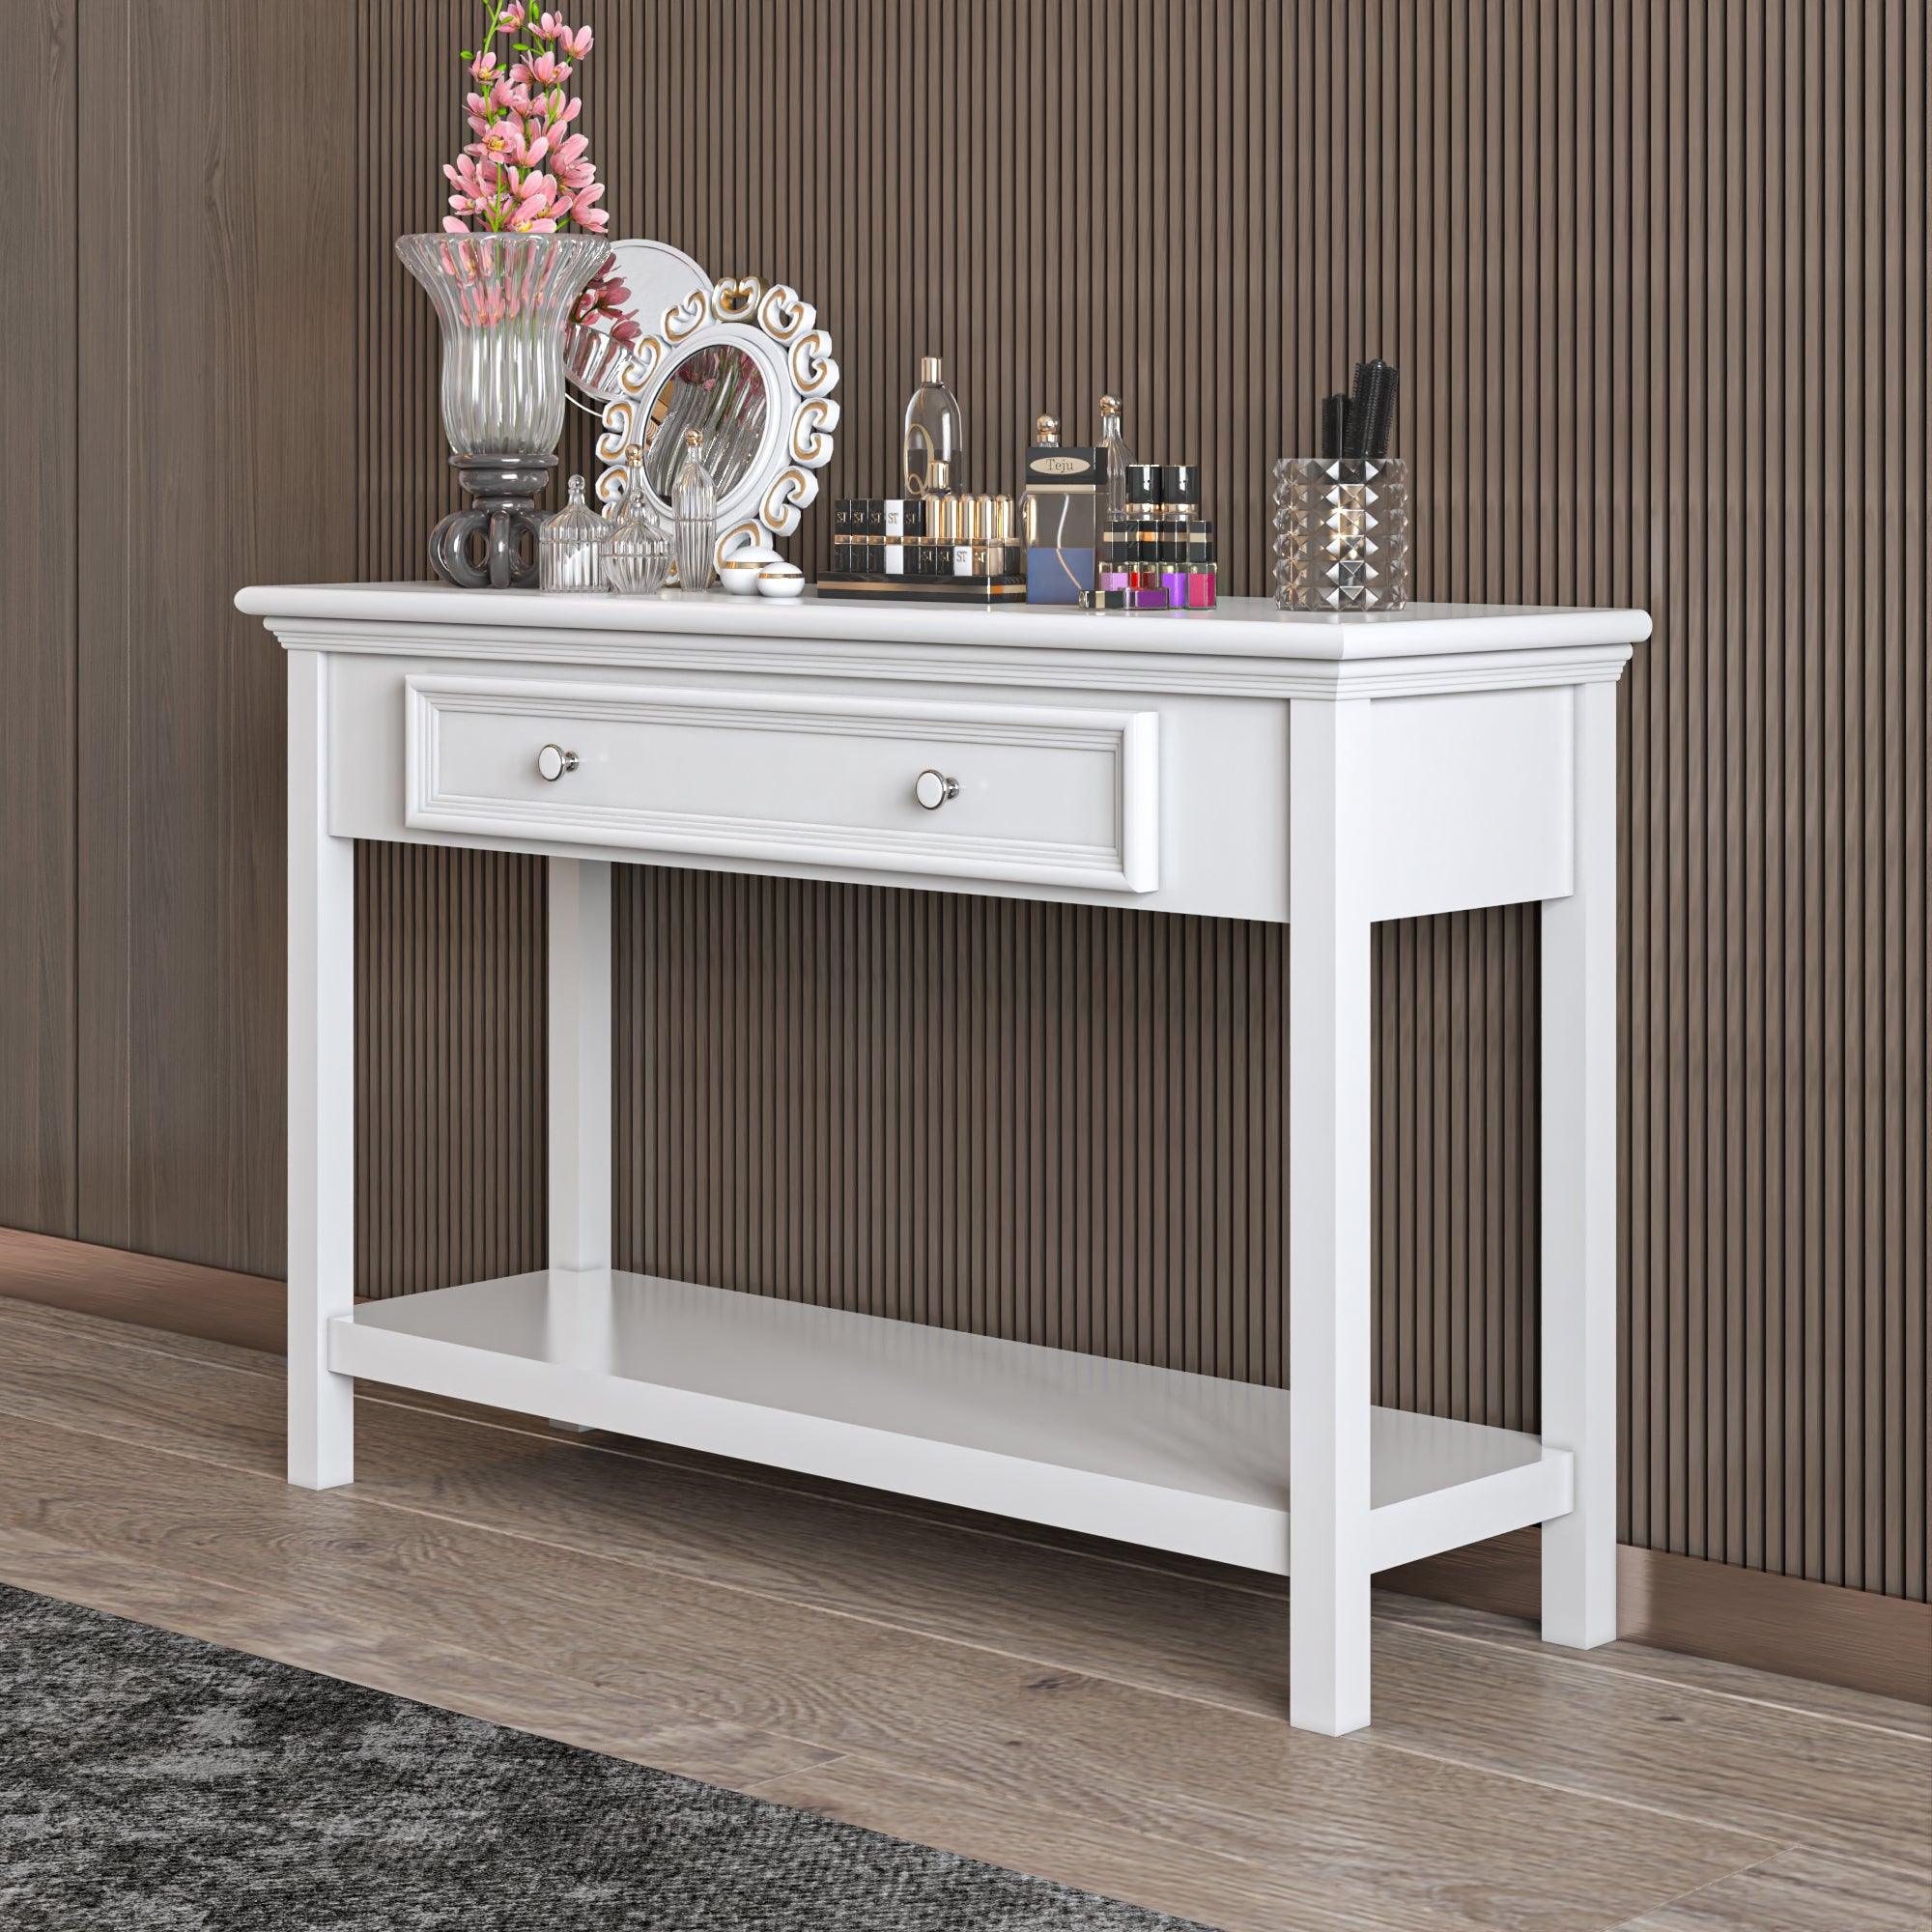 🆓🚛 Modern Country Inspired Solid Wood Structure, Console Table With Drawer & Shelve, Timeless Design & Elegant With Embellish Details